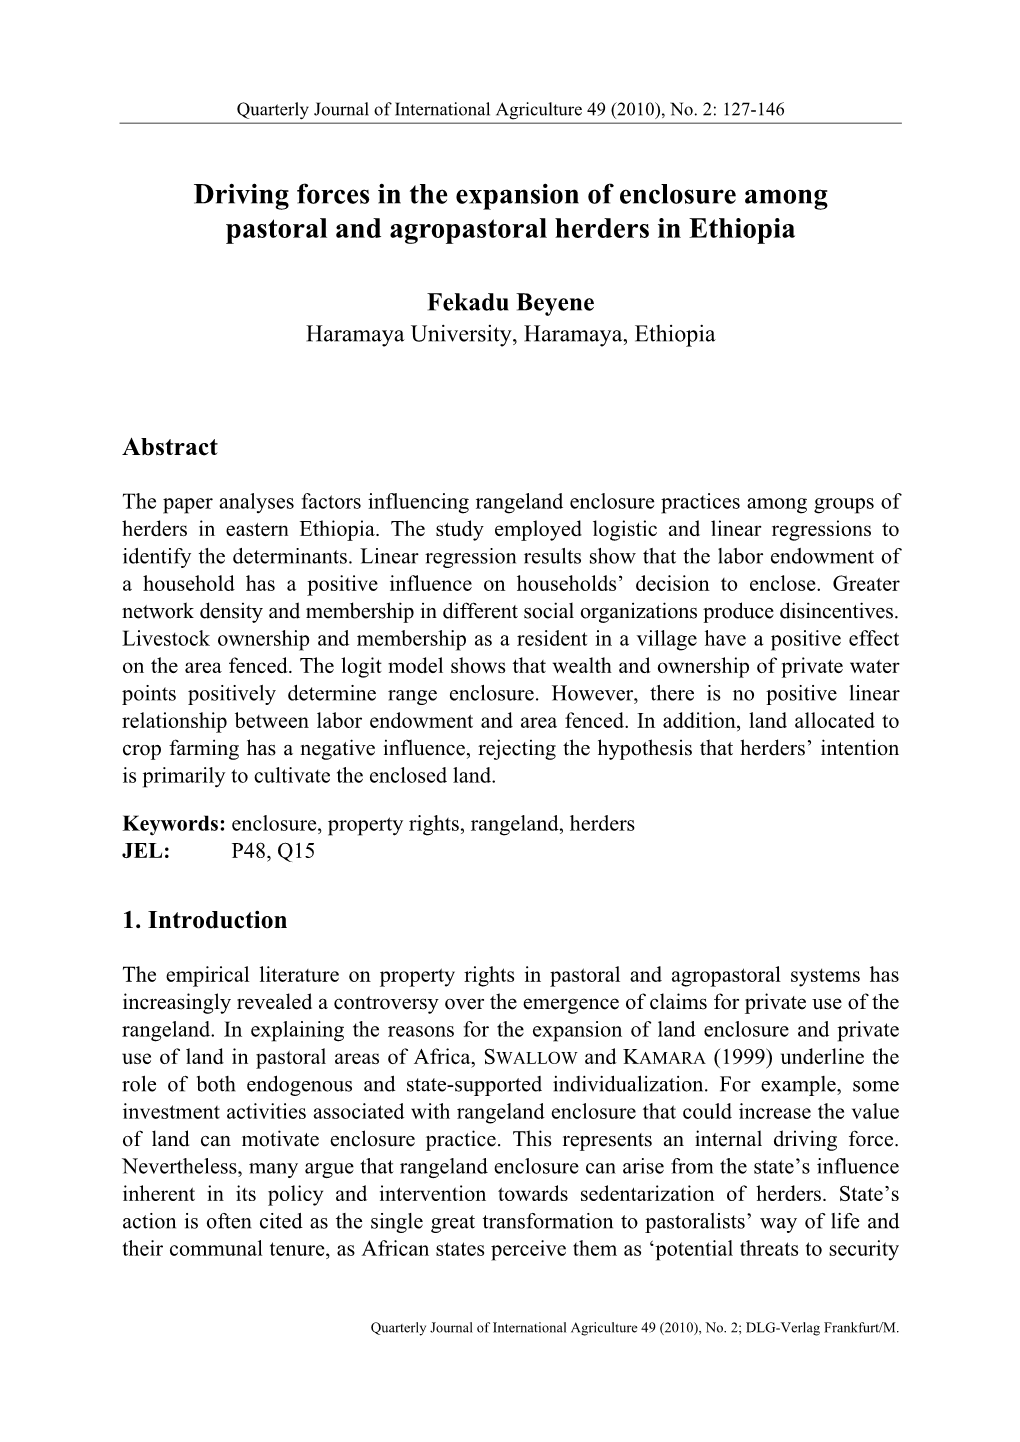 Driving Forces in the Expansion of Enclosure Among Pastoral and Agropastoral Herders in Ethiopia